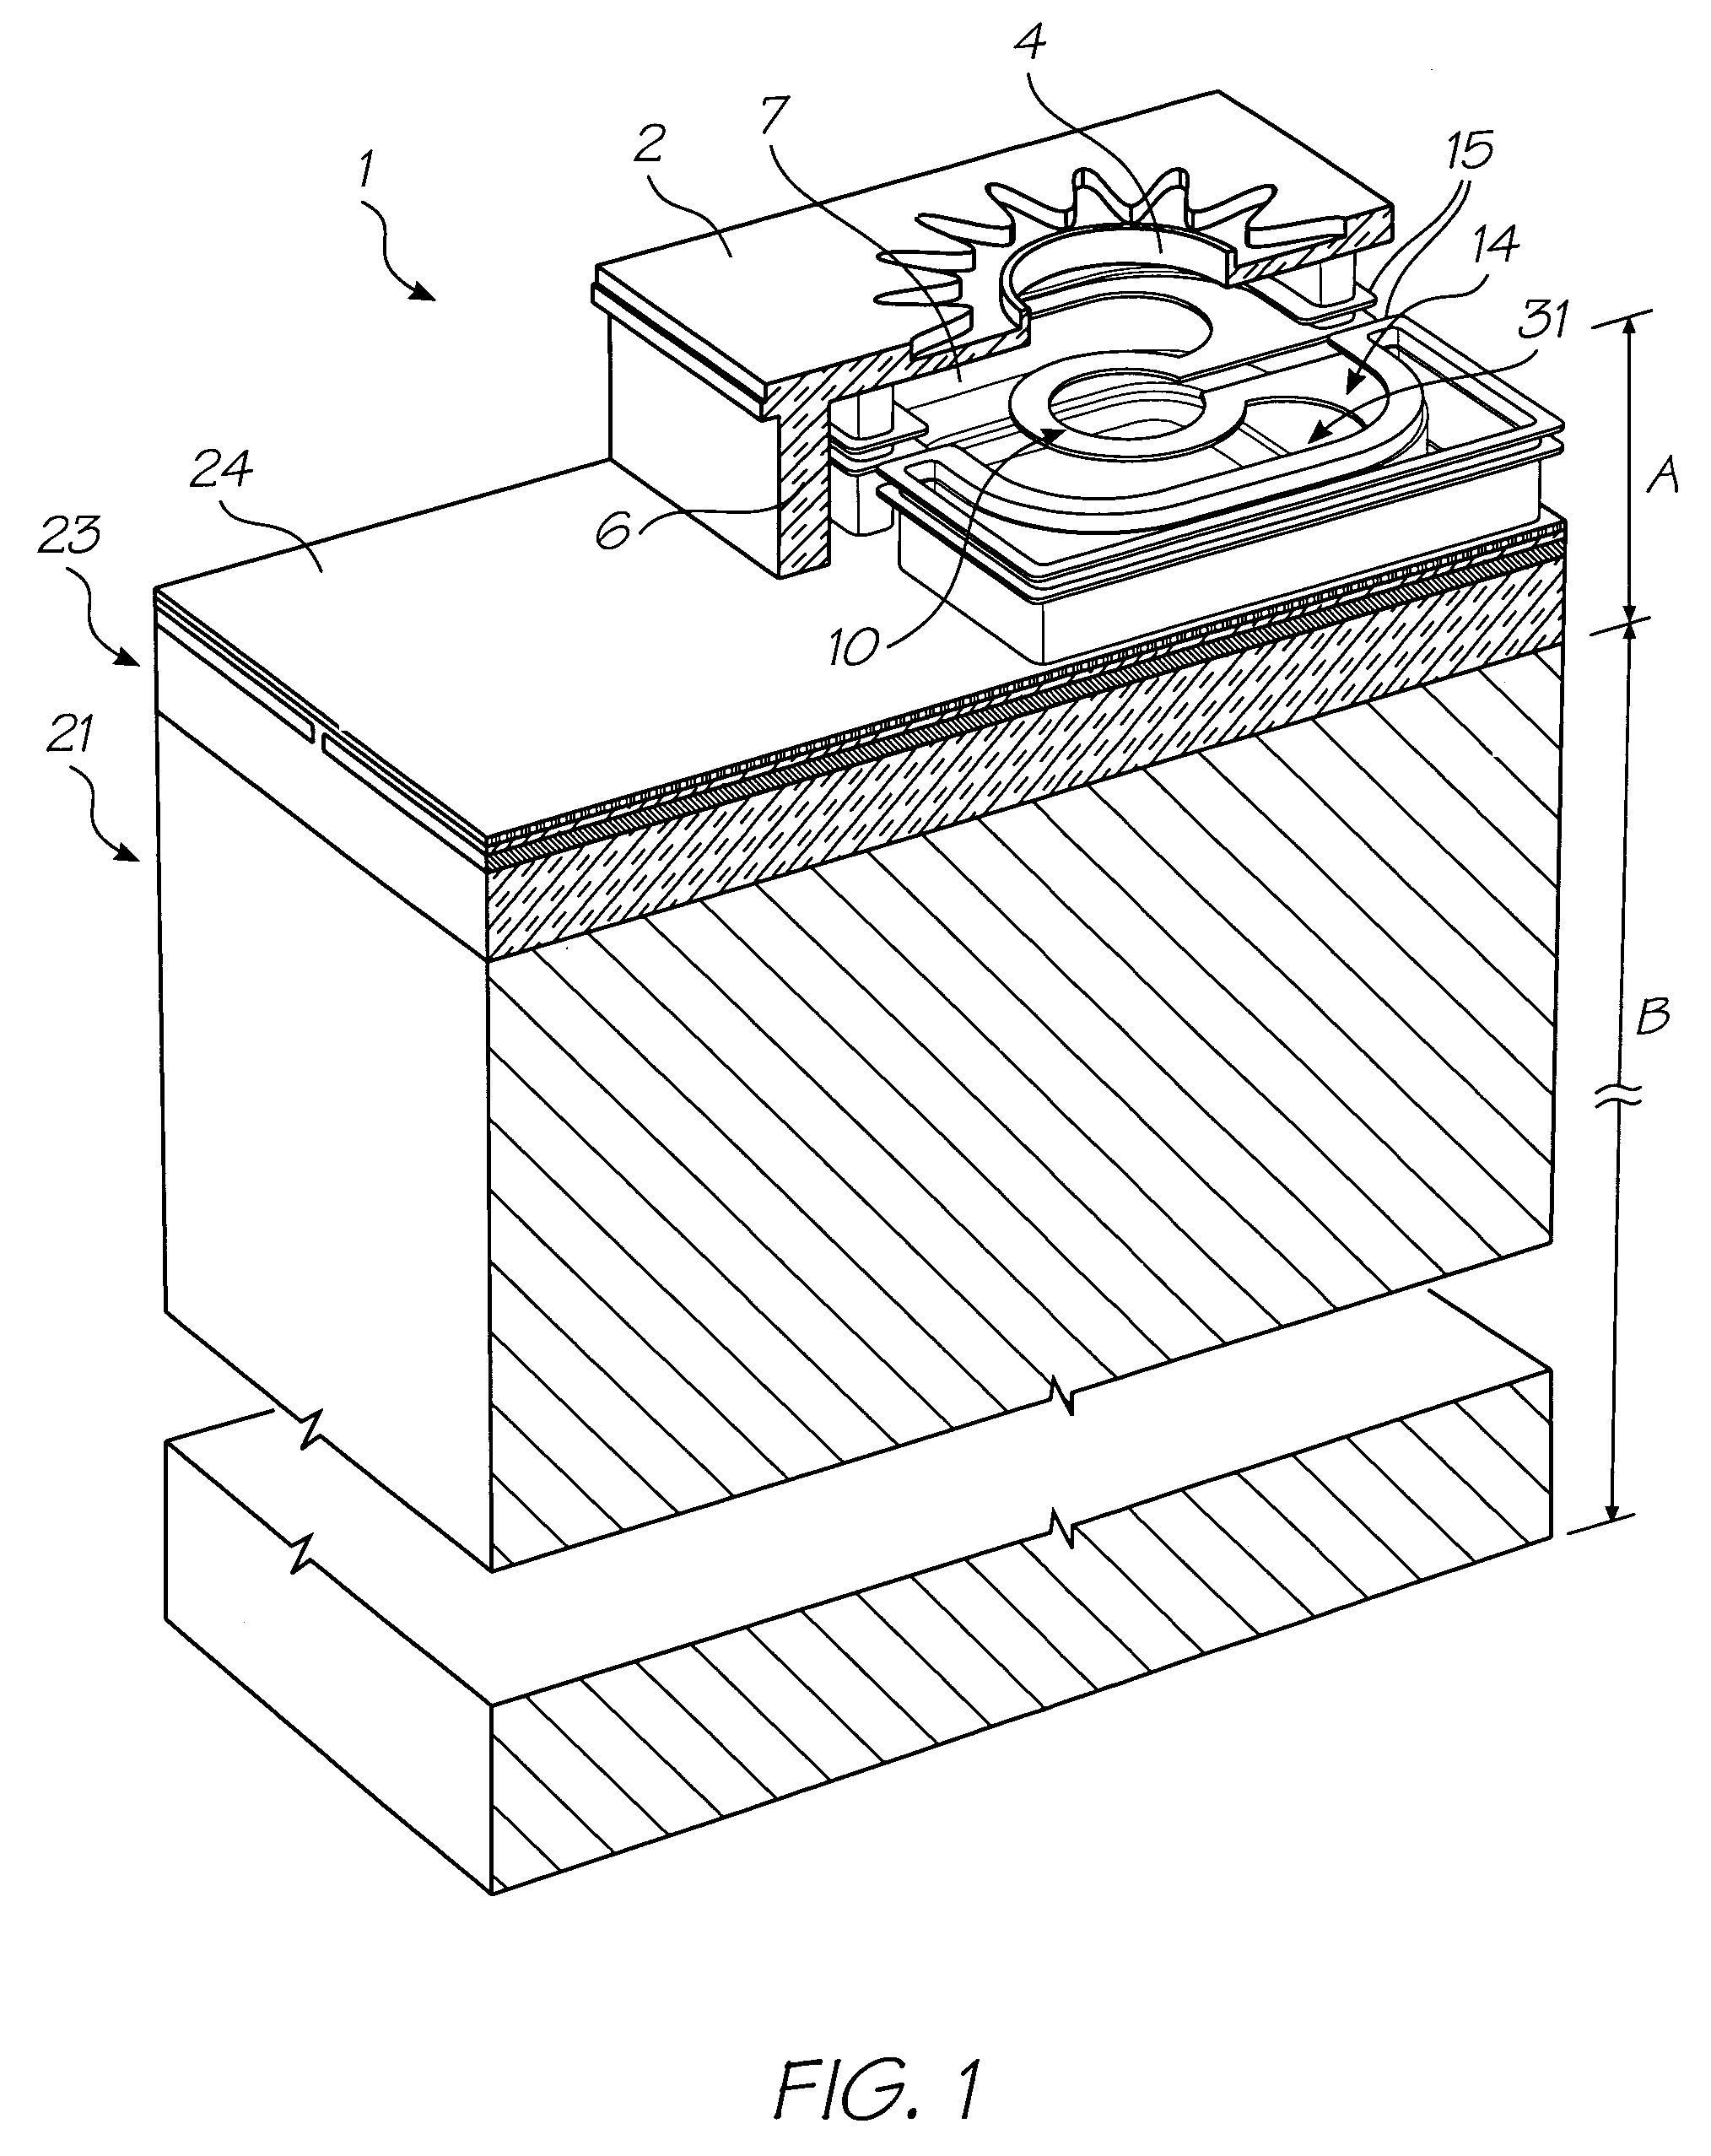 Inkjet printhead with CMOS drive circuitry close to ink supply passage